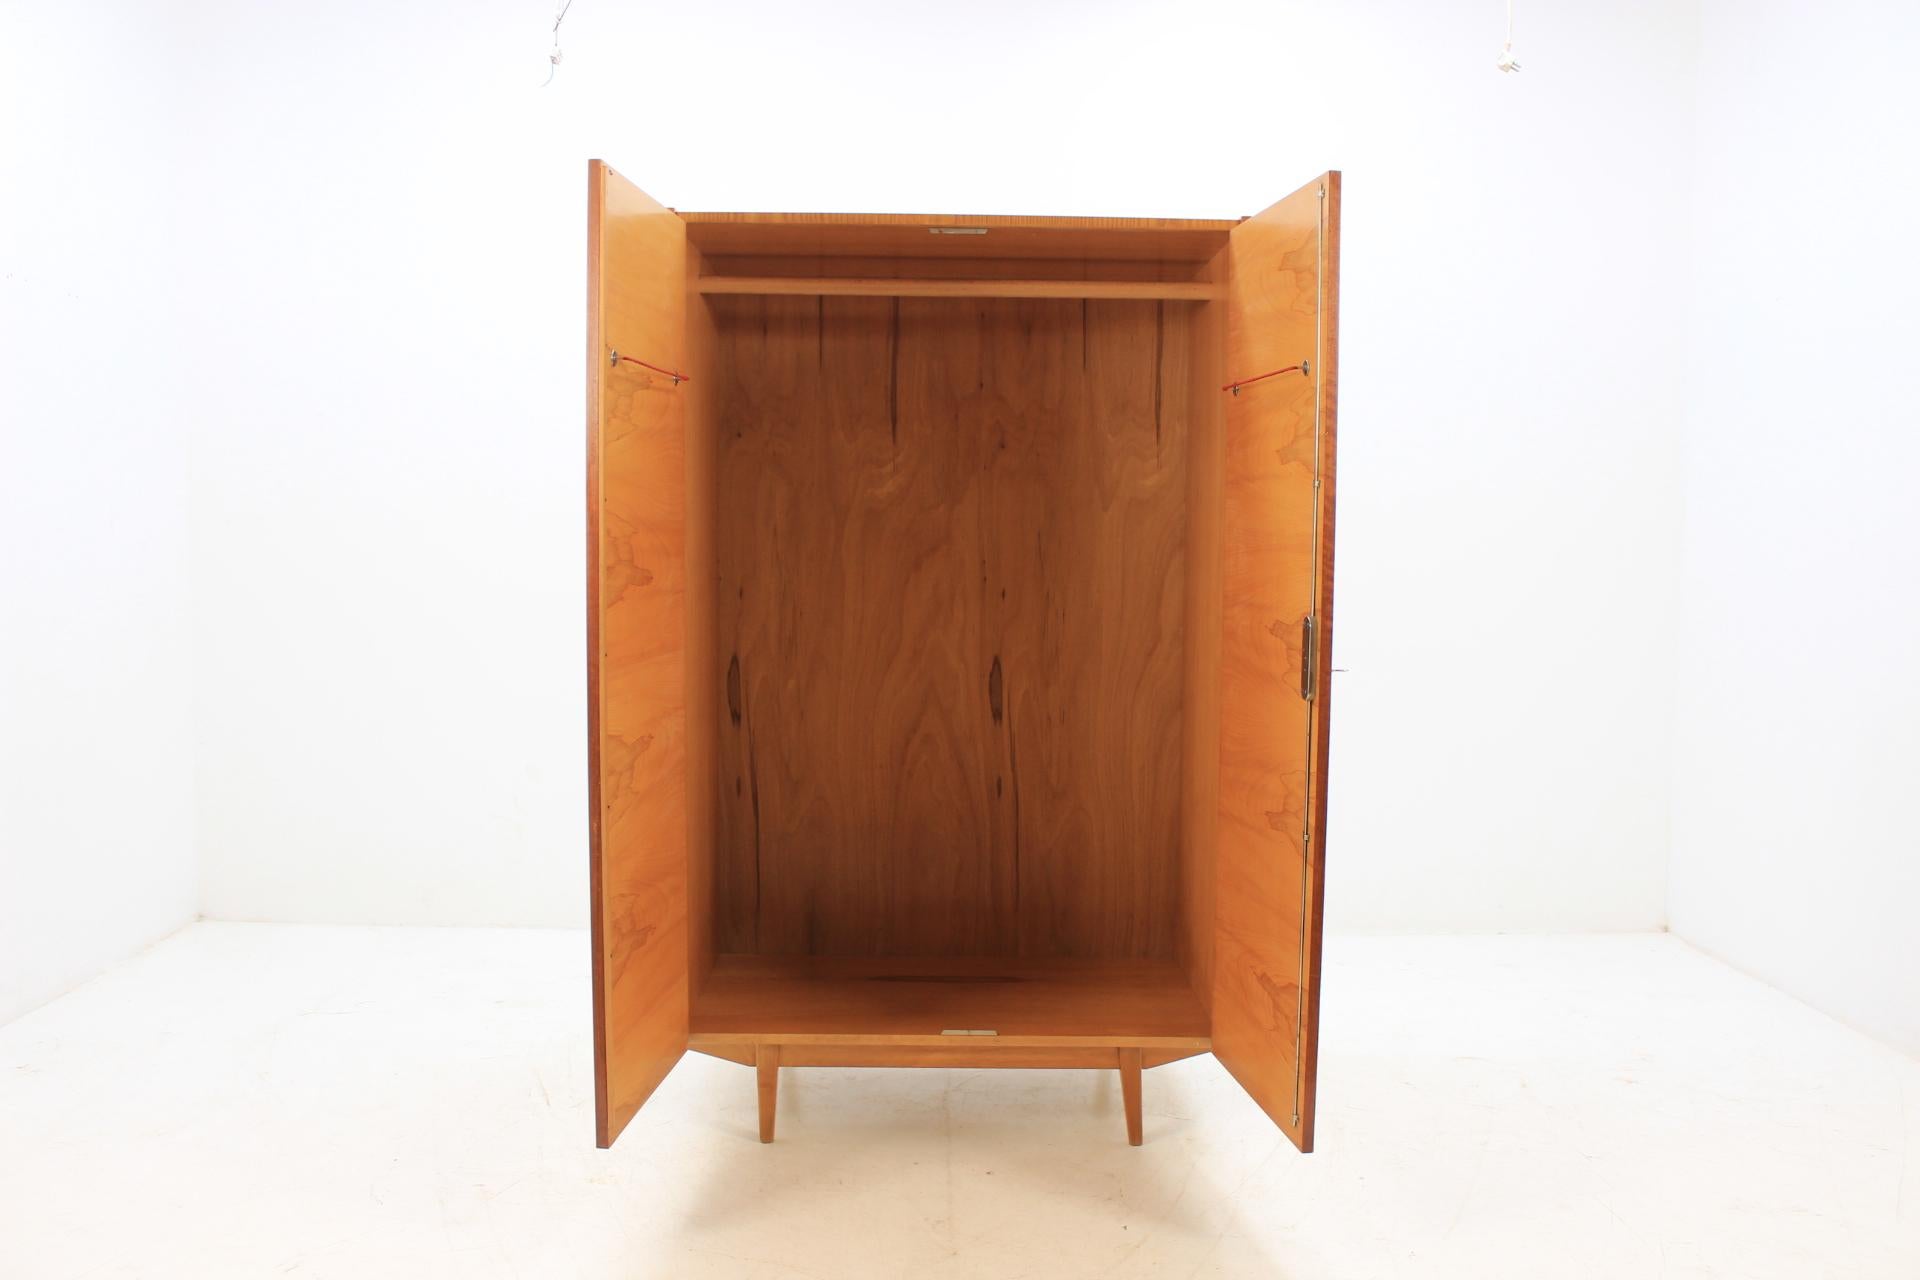 The item made of ashwood, and walnut. The doors are made in high gloss. Manufacture in Stolak, Tábor Czechoslovakia. Original, very preserved condition.